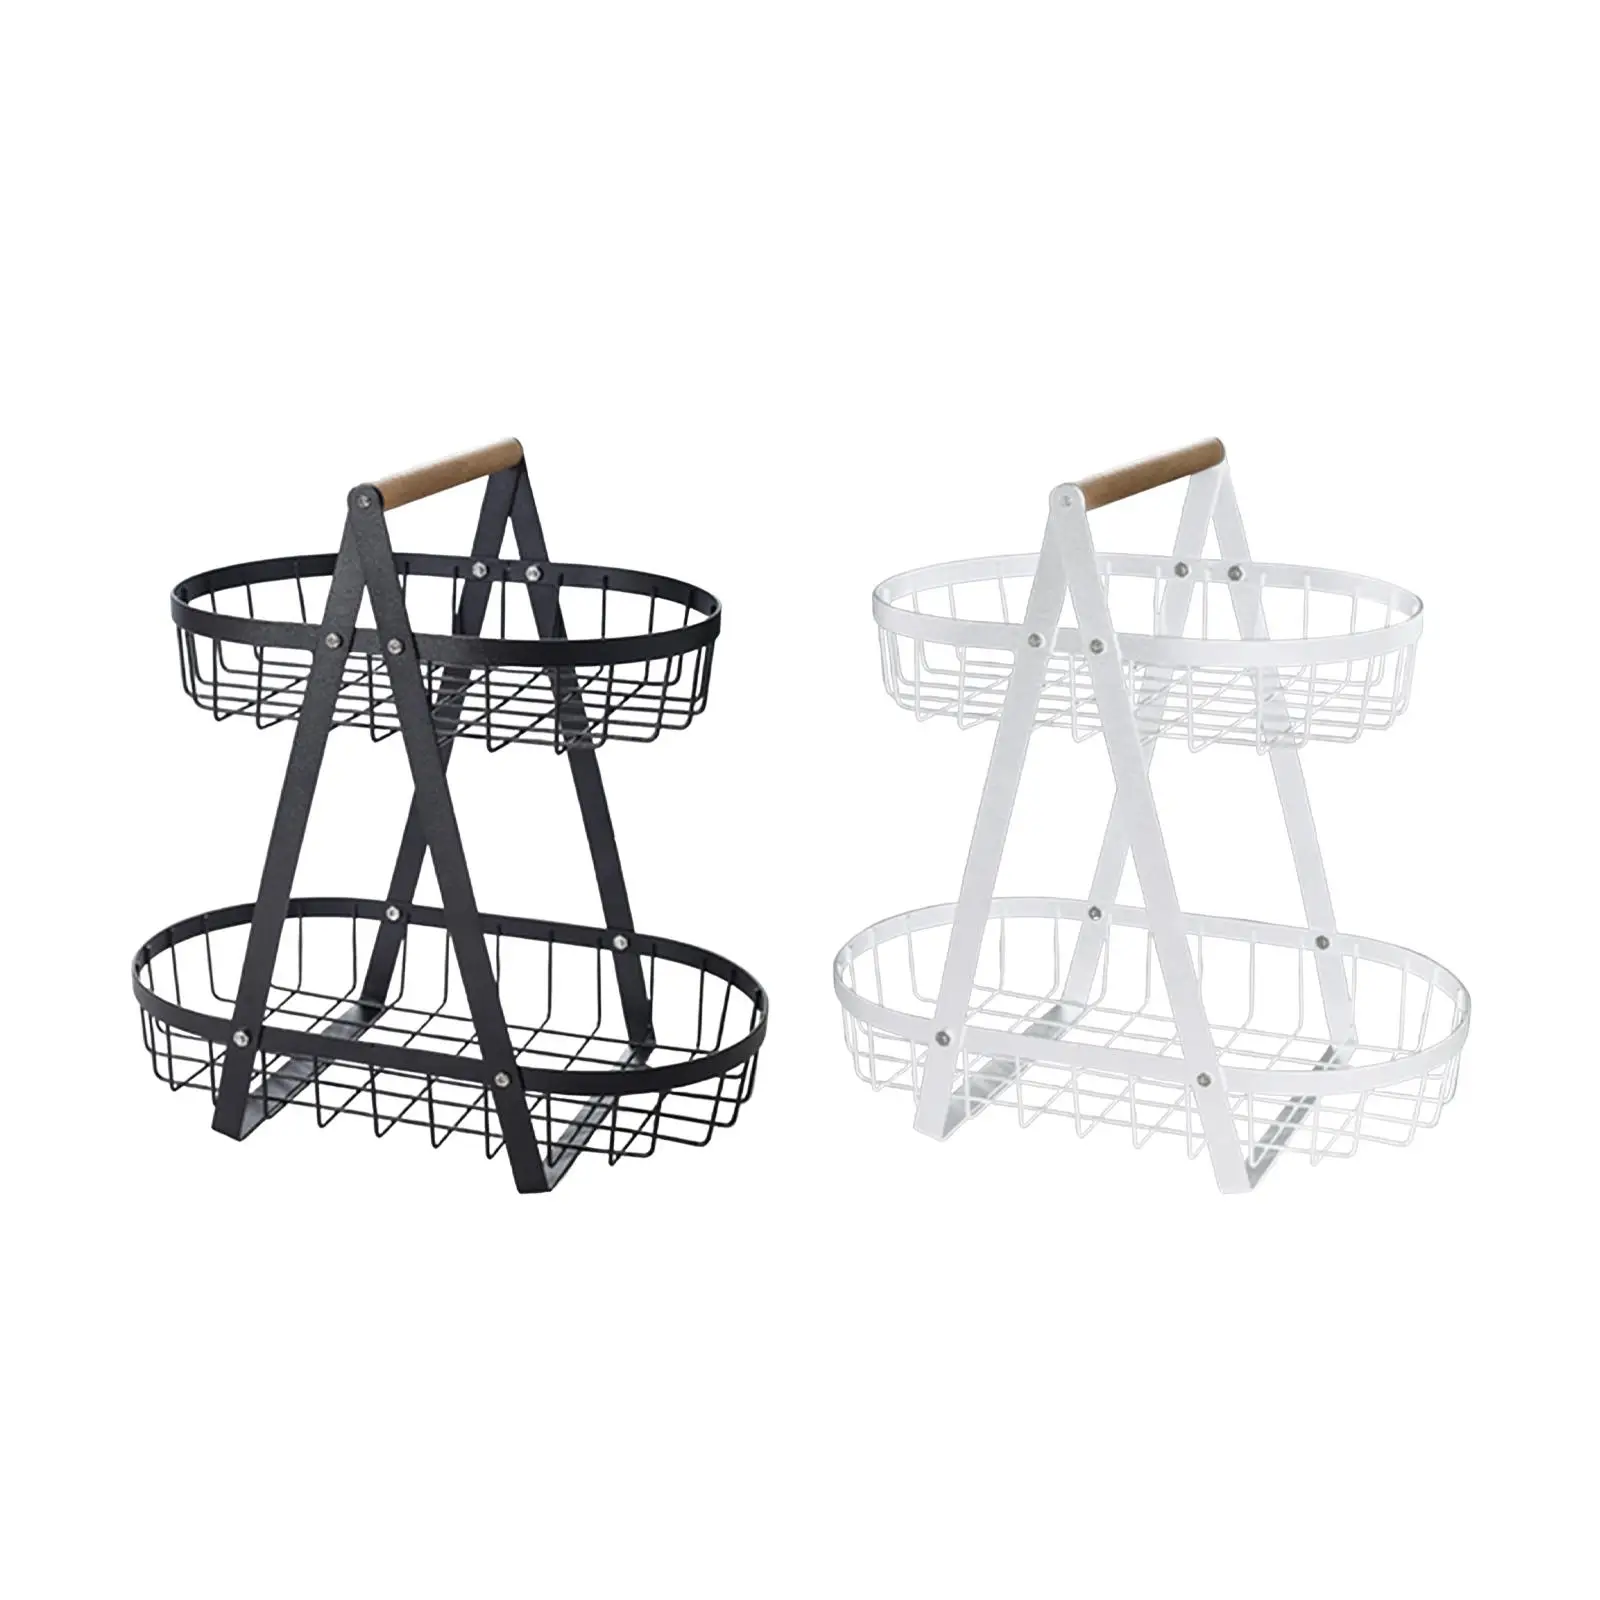 Metal wire storage basket for fruits and vegetables and vegetables portable for